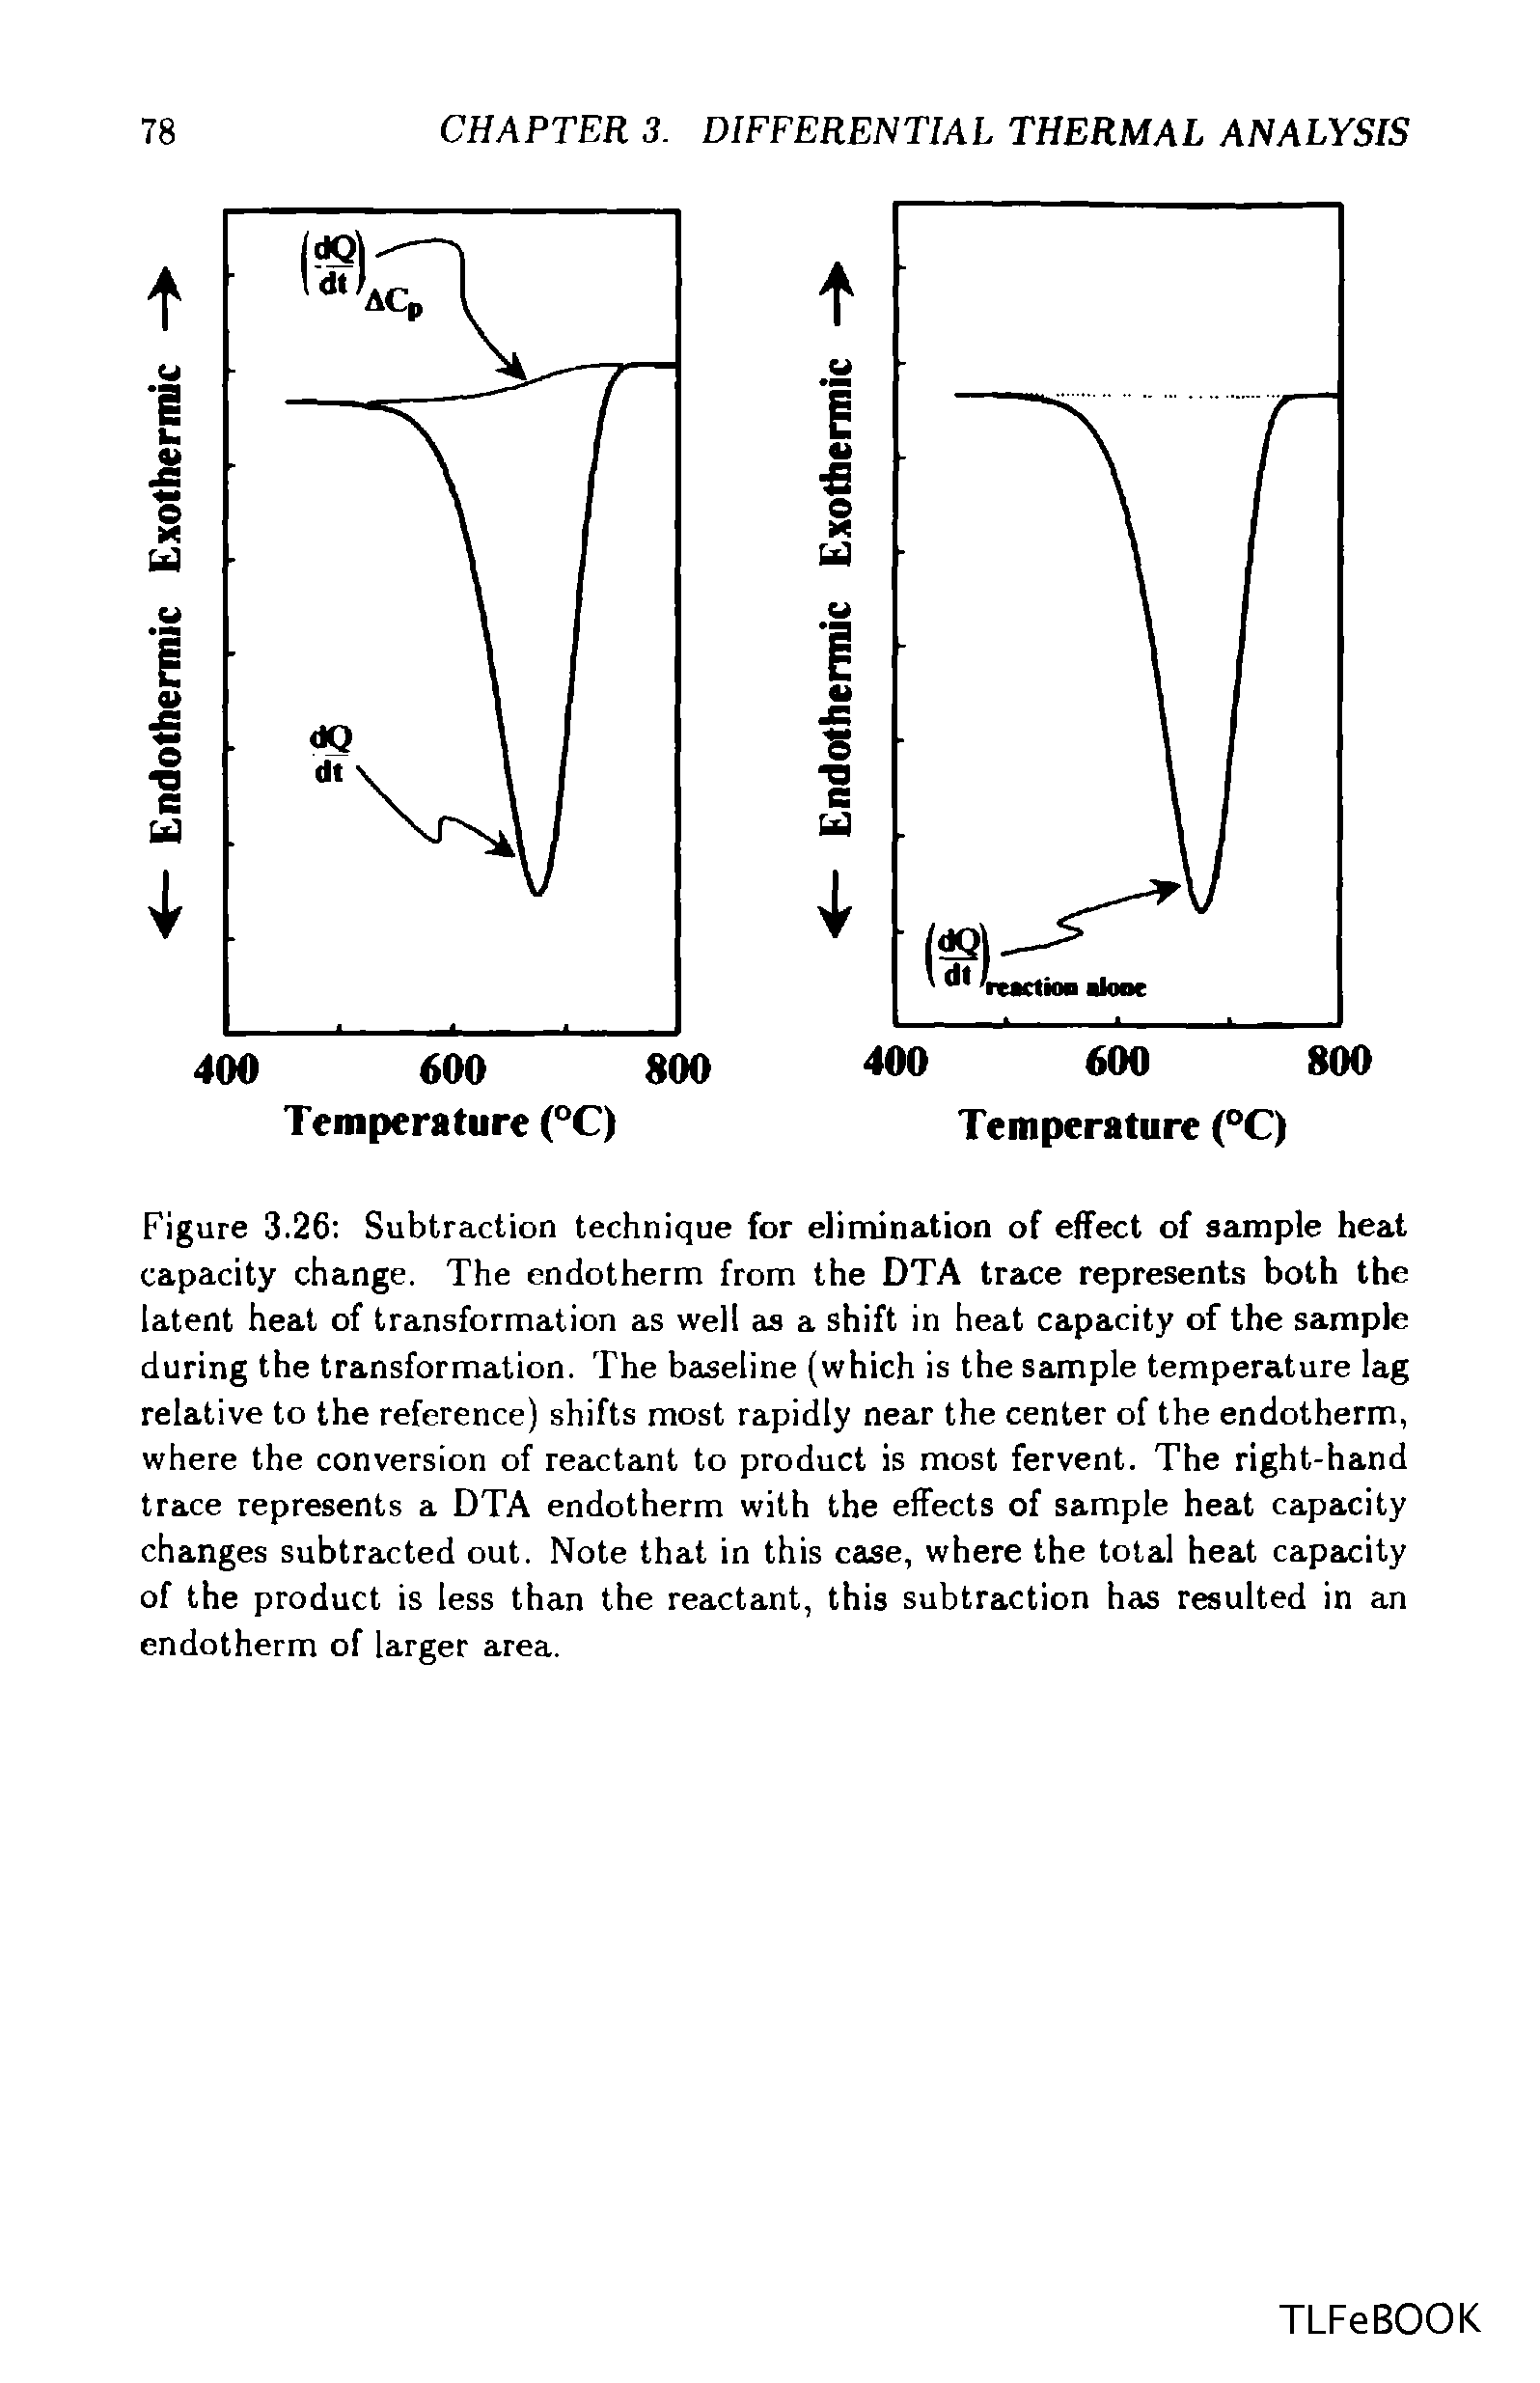 Figure 3.26 Subtraction technique for elimination of effect of sample heat capacity change. The endotherm from the DTA trace represents both the latent heat of transformation as well as a shift in heat capacity of the sample during the transformation. The baseline (which is the sample temperature lag relative to the reference) shifts most rapidly near the center of the endotherm, where the conversion of reactant to product is most fervent. The right-hand trace represents a DTA endotherm with the effects of sample heat capacity changes subtracted out. Note that in this case, where the total heat capacity of the product is less than the reactant, this subtraction has resulted in an endotherm of larger area.